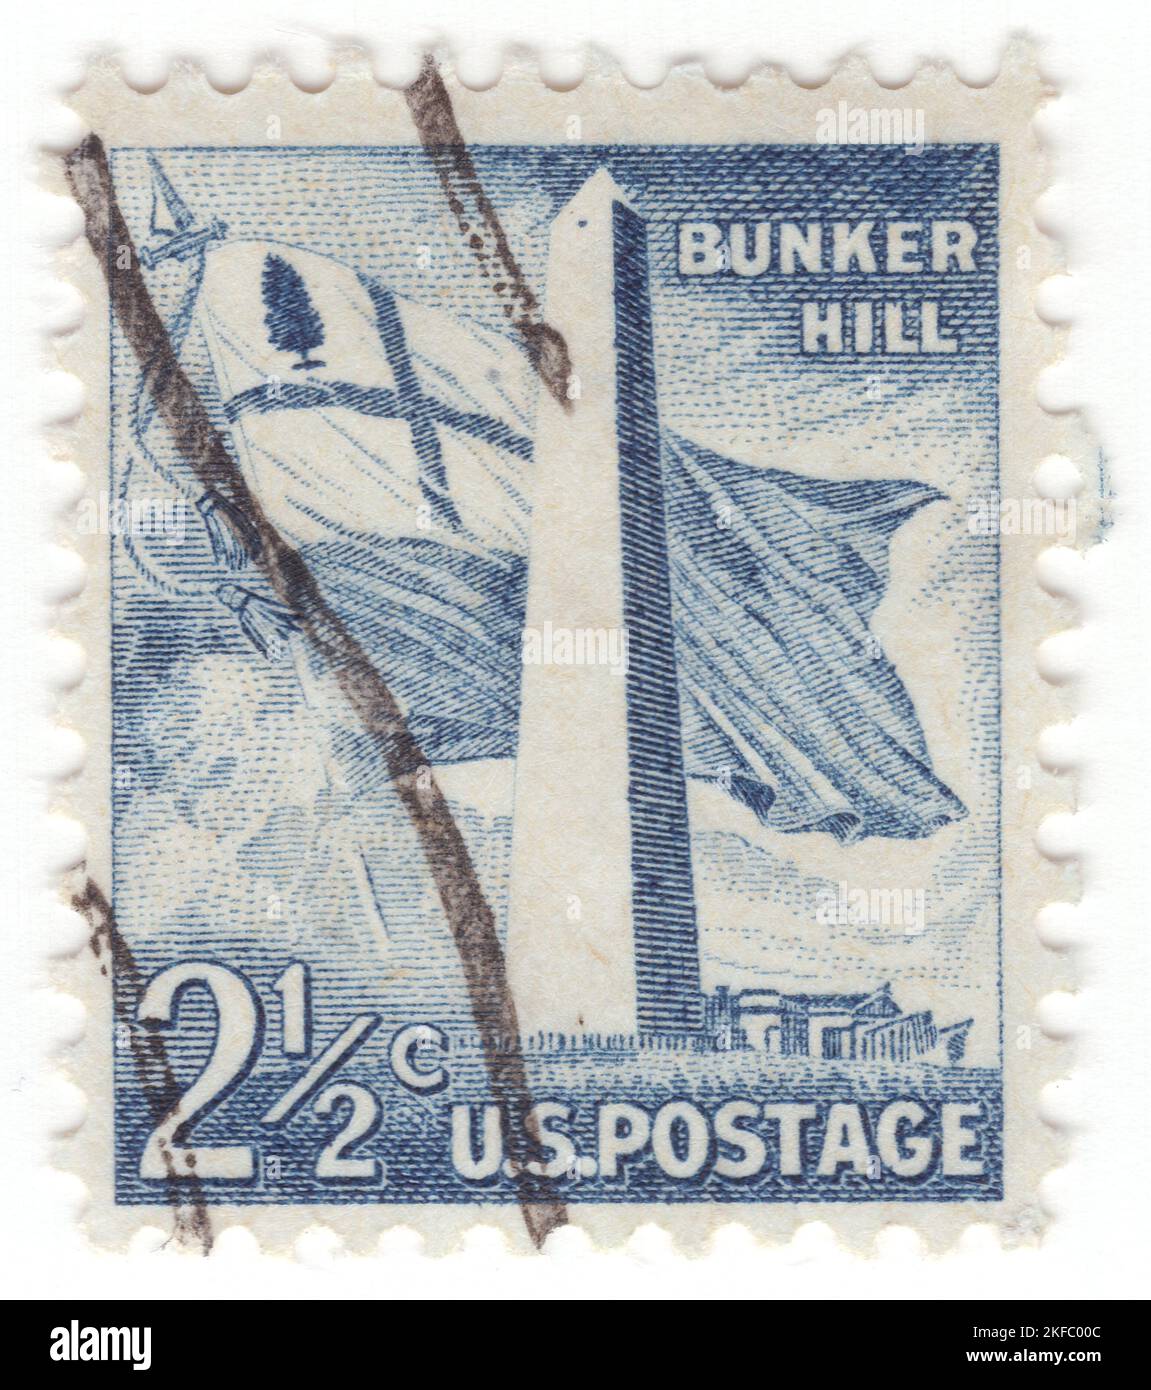 USA - 1959: An 2½ cents grey-blue postage stamp depicting Bunker Hill Monument is a monument erected at the site of the Battle of Bunker Hill in Boston, Massachusetts, which was among the first major battles between the Red Coats and Patriots in the American Revolutionary War. The 221-foot (67 m) granite obelisk was erected between 1825 and 1843 in Charlestown, Massachusetts, with granite from nearby Quincy conveyed to the site via the purpose-built Granite Railway, followed by a trip by barge. There are 294 steps to the top Stock Photo